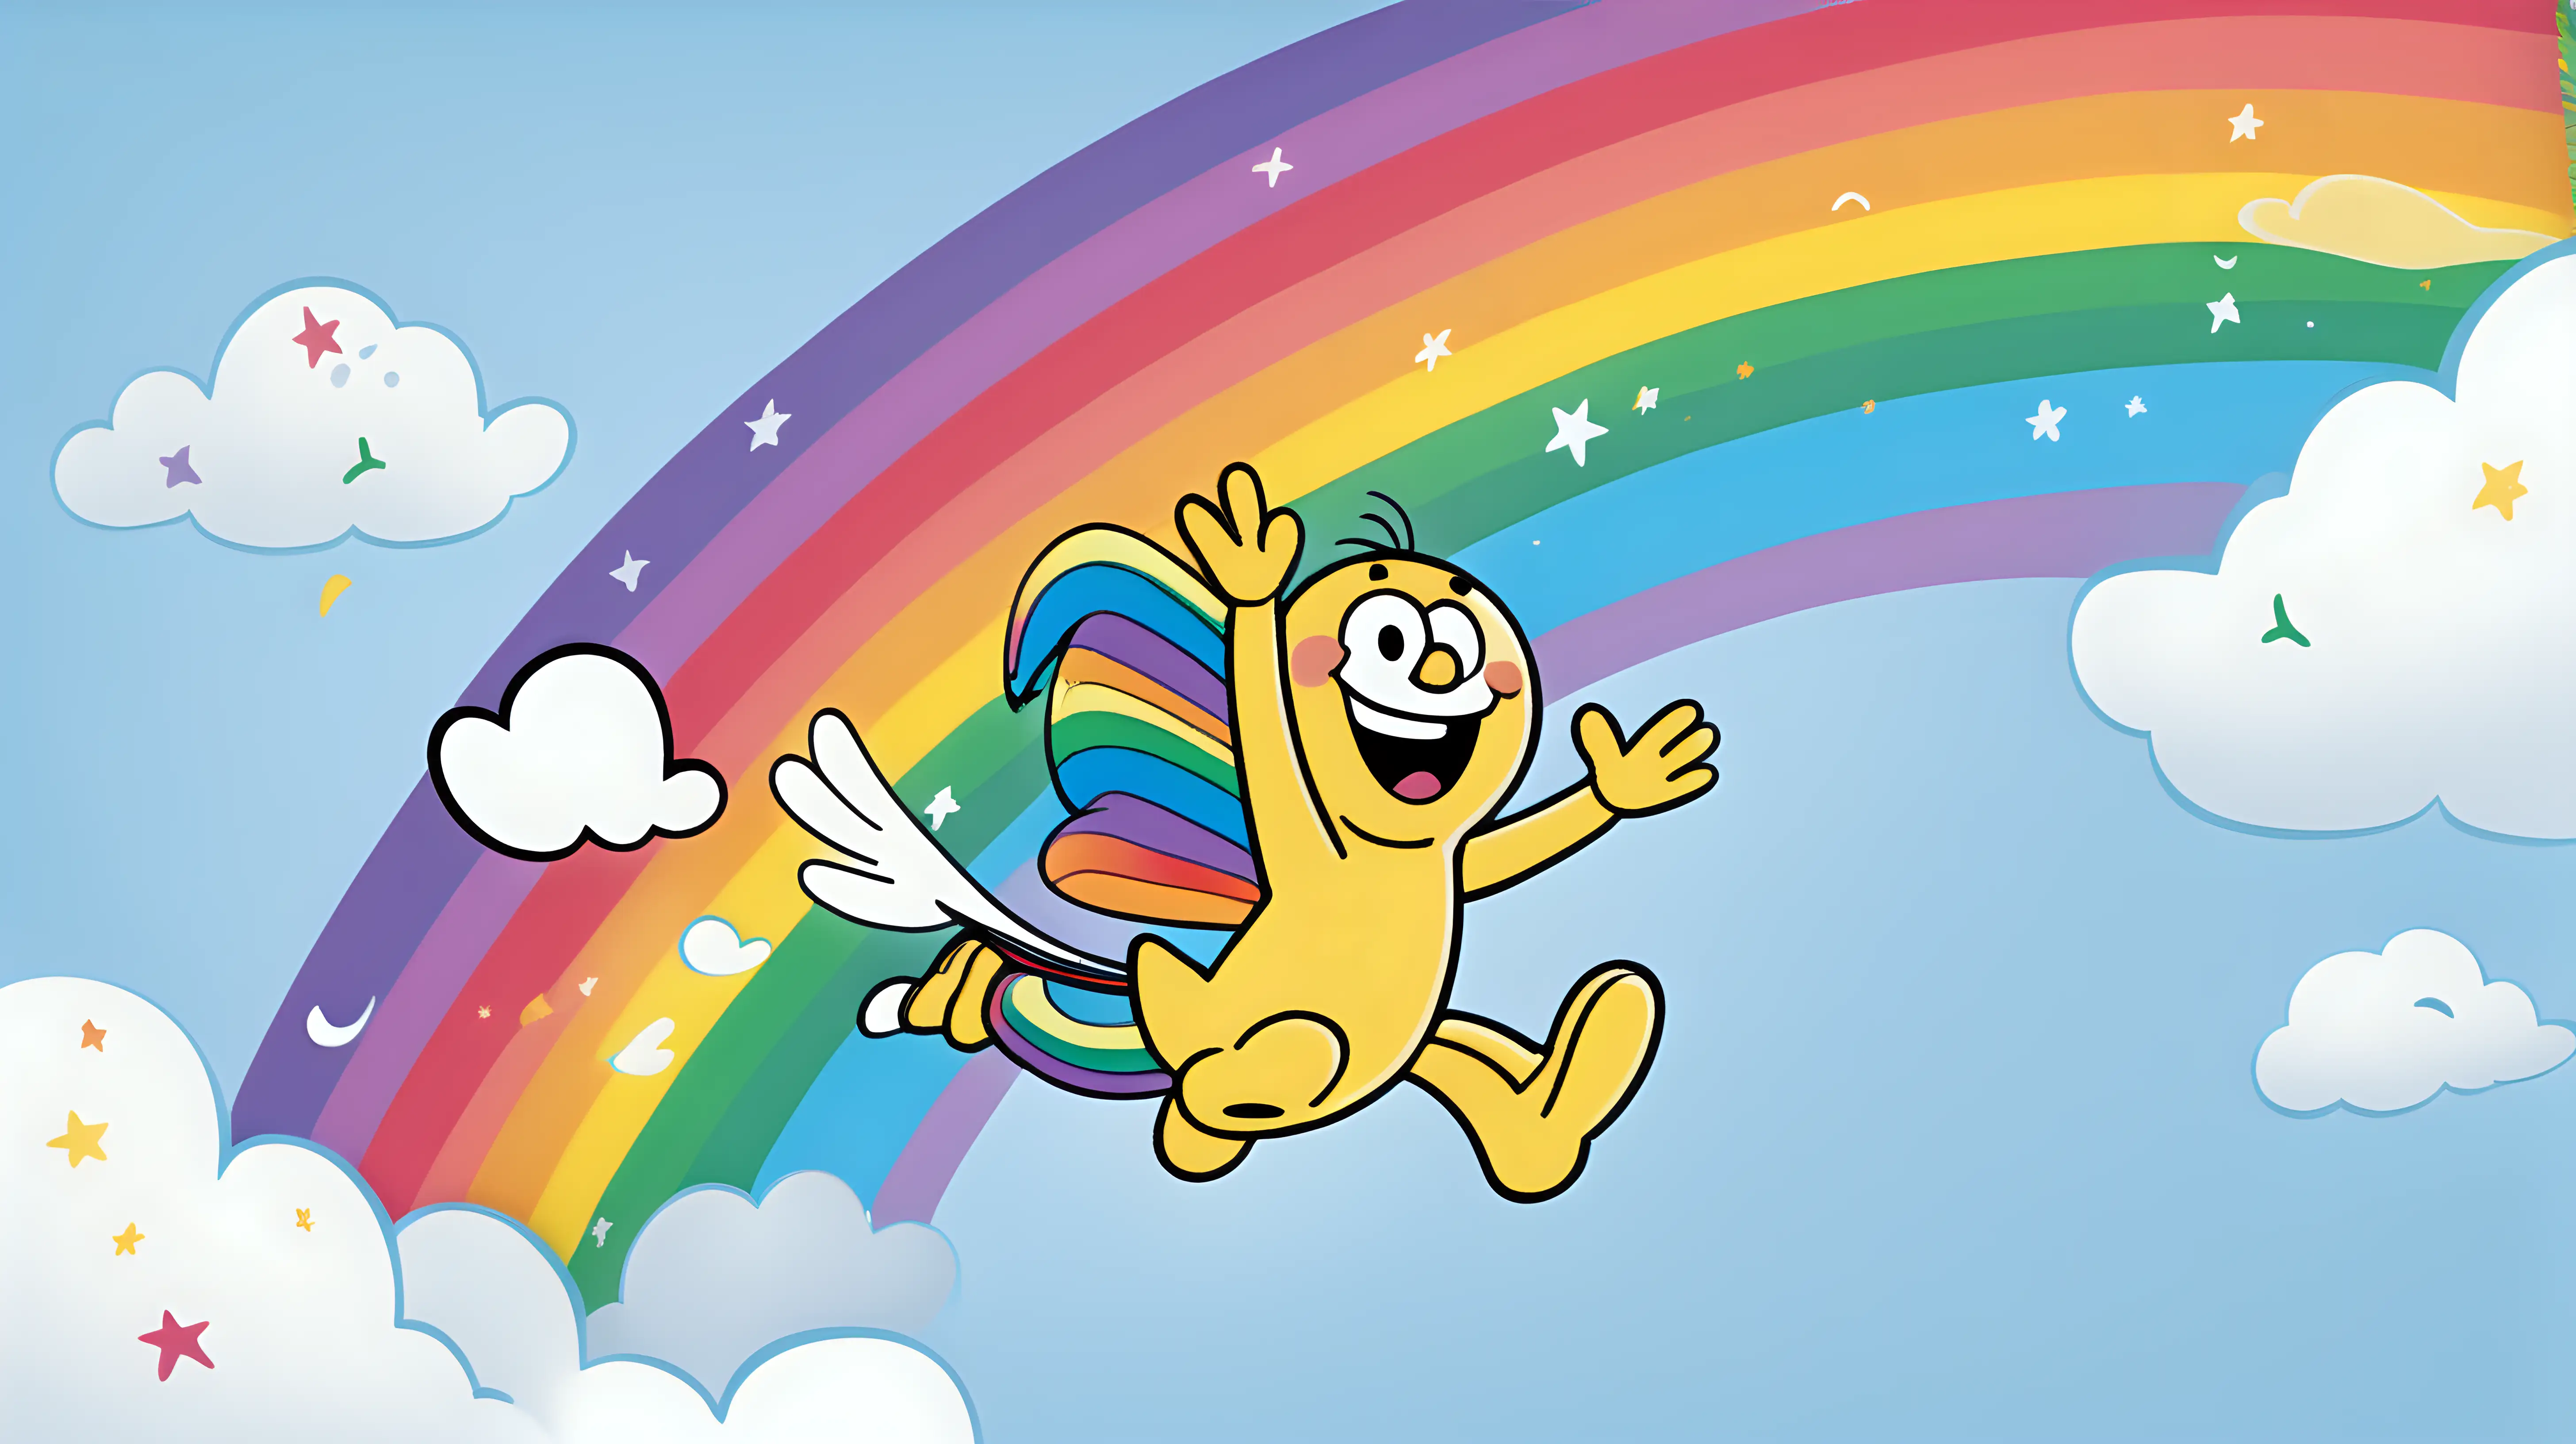 A joyful cartoon character flying on a rainbow, leaving a trail of happiness.